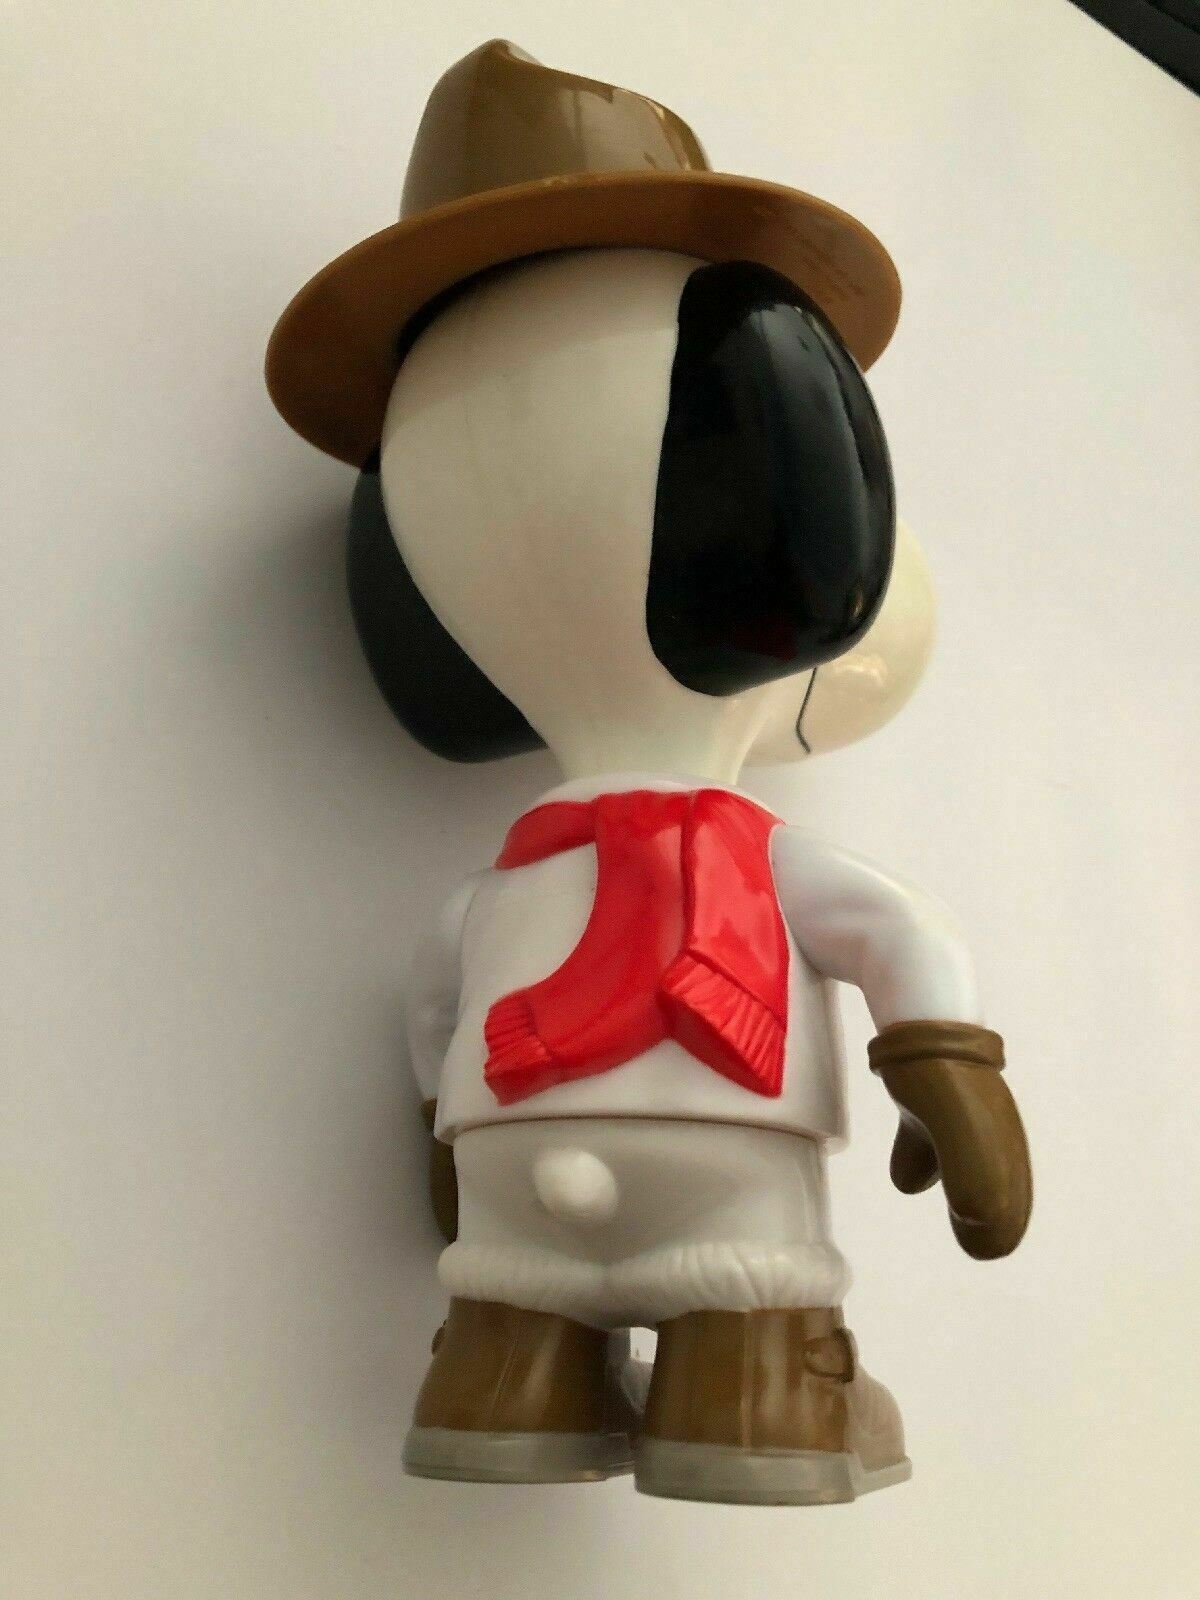 Boy Scout SNOOPY   Genuine McDonald's Toys Peanuts Promotional Toy